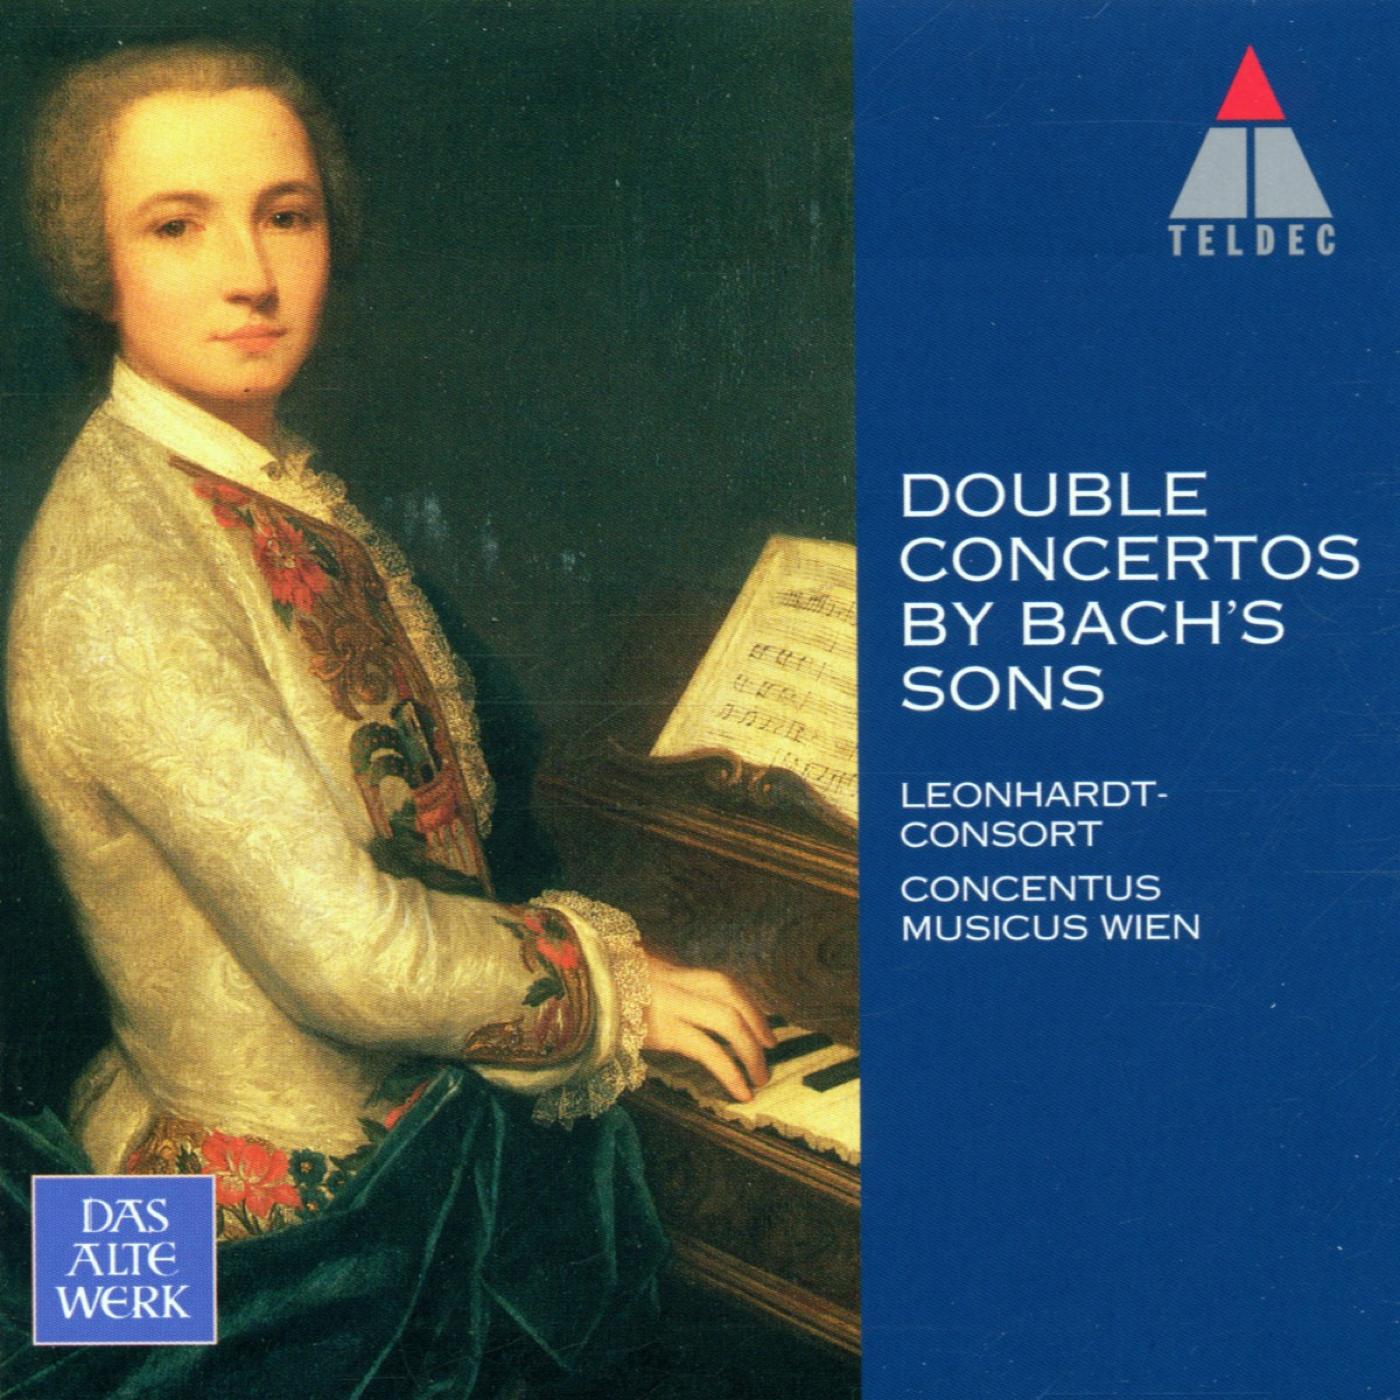 Double Concertos by Bach's Sons